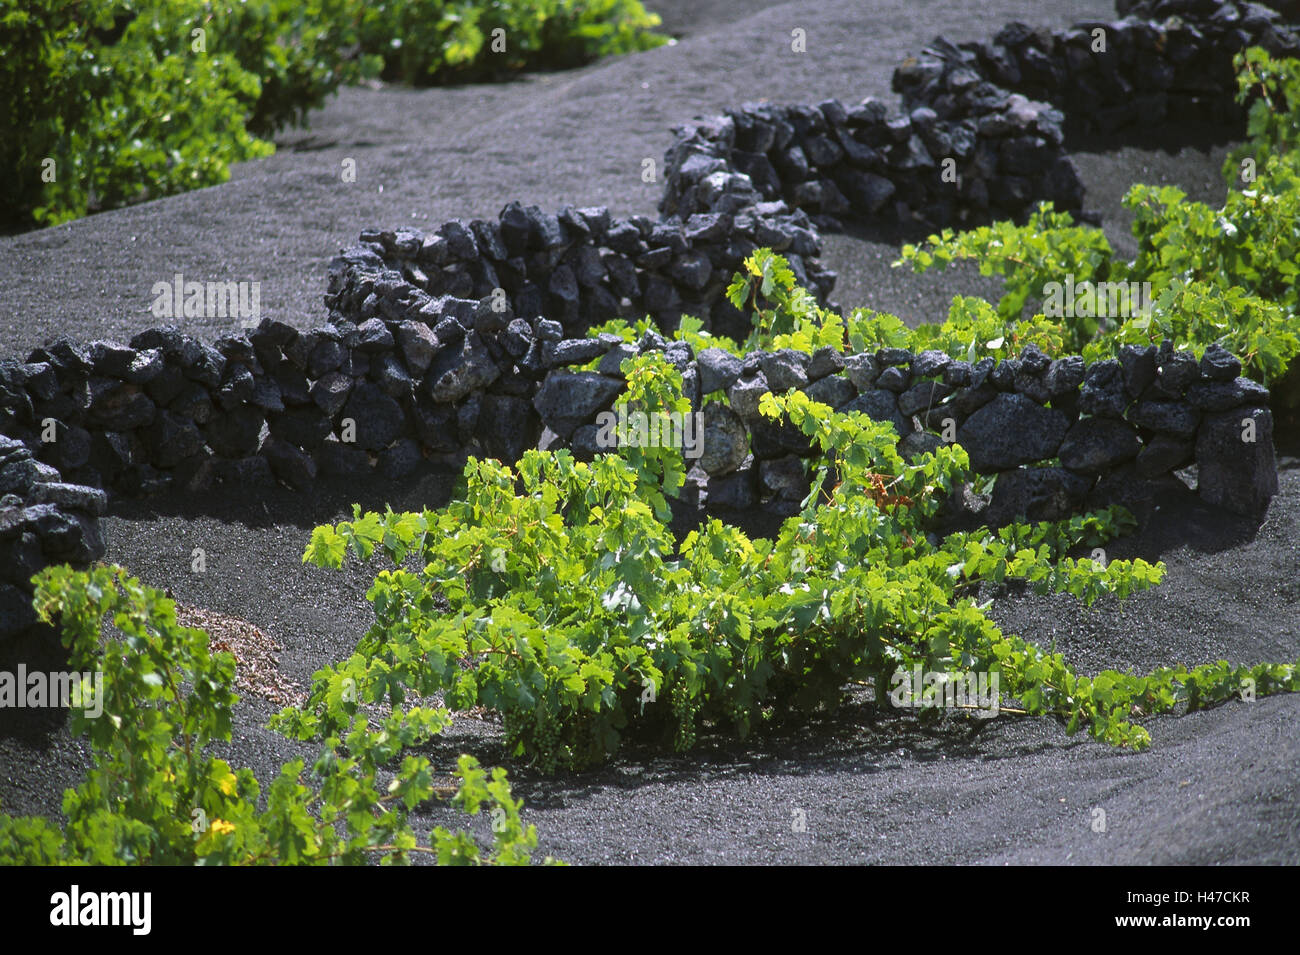 Spain, the Canaries, island Lanzarote, wine-growing area La Geria, to Lavaschutzmauern, vines, tradition, Rafinesse, agriculture, wine, irrigation, climate, lava, lava scenery, dry fields, dry field construction, viticulture, lava stones, Lavasand, defensive walls, Stock Photo